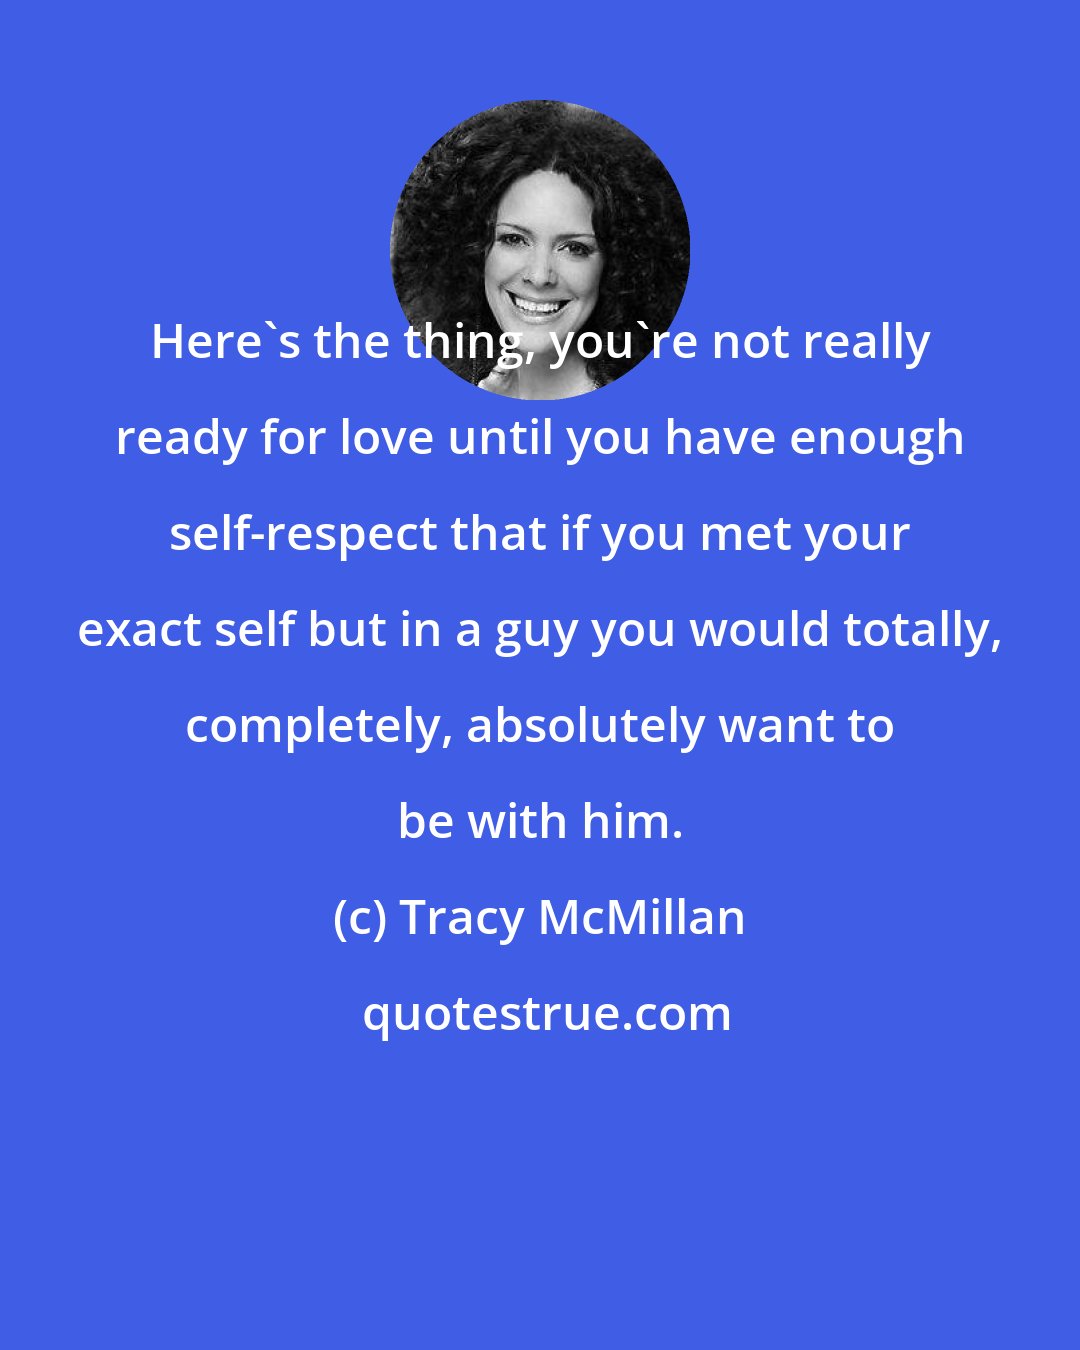 Tracy McMillan: Here's the thing, you're not really ready for love until you have enough self-respect that if you met your exact self but in a guy you would totally, completely, absolutely want to be with him.